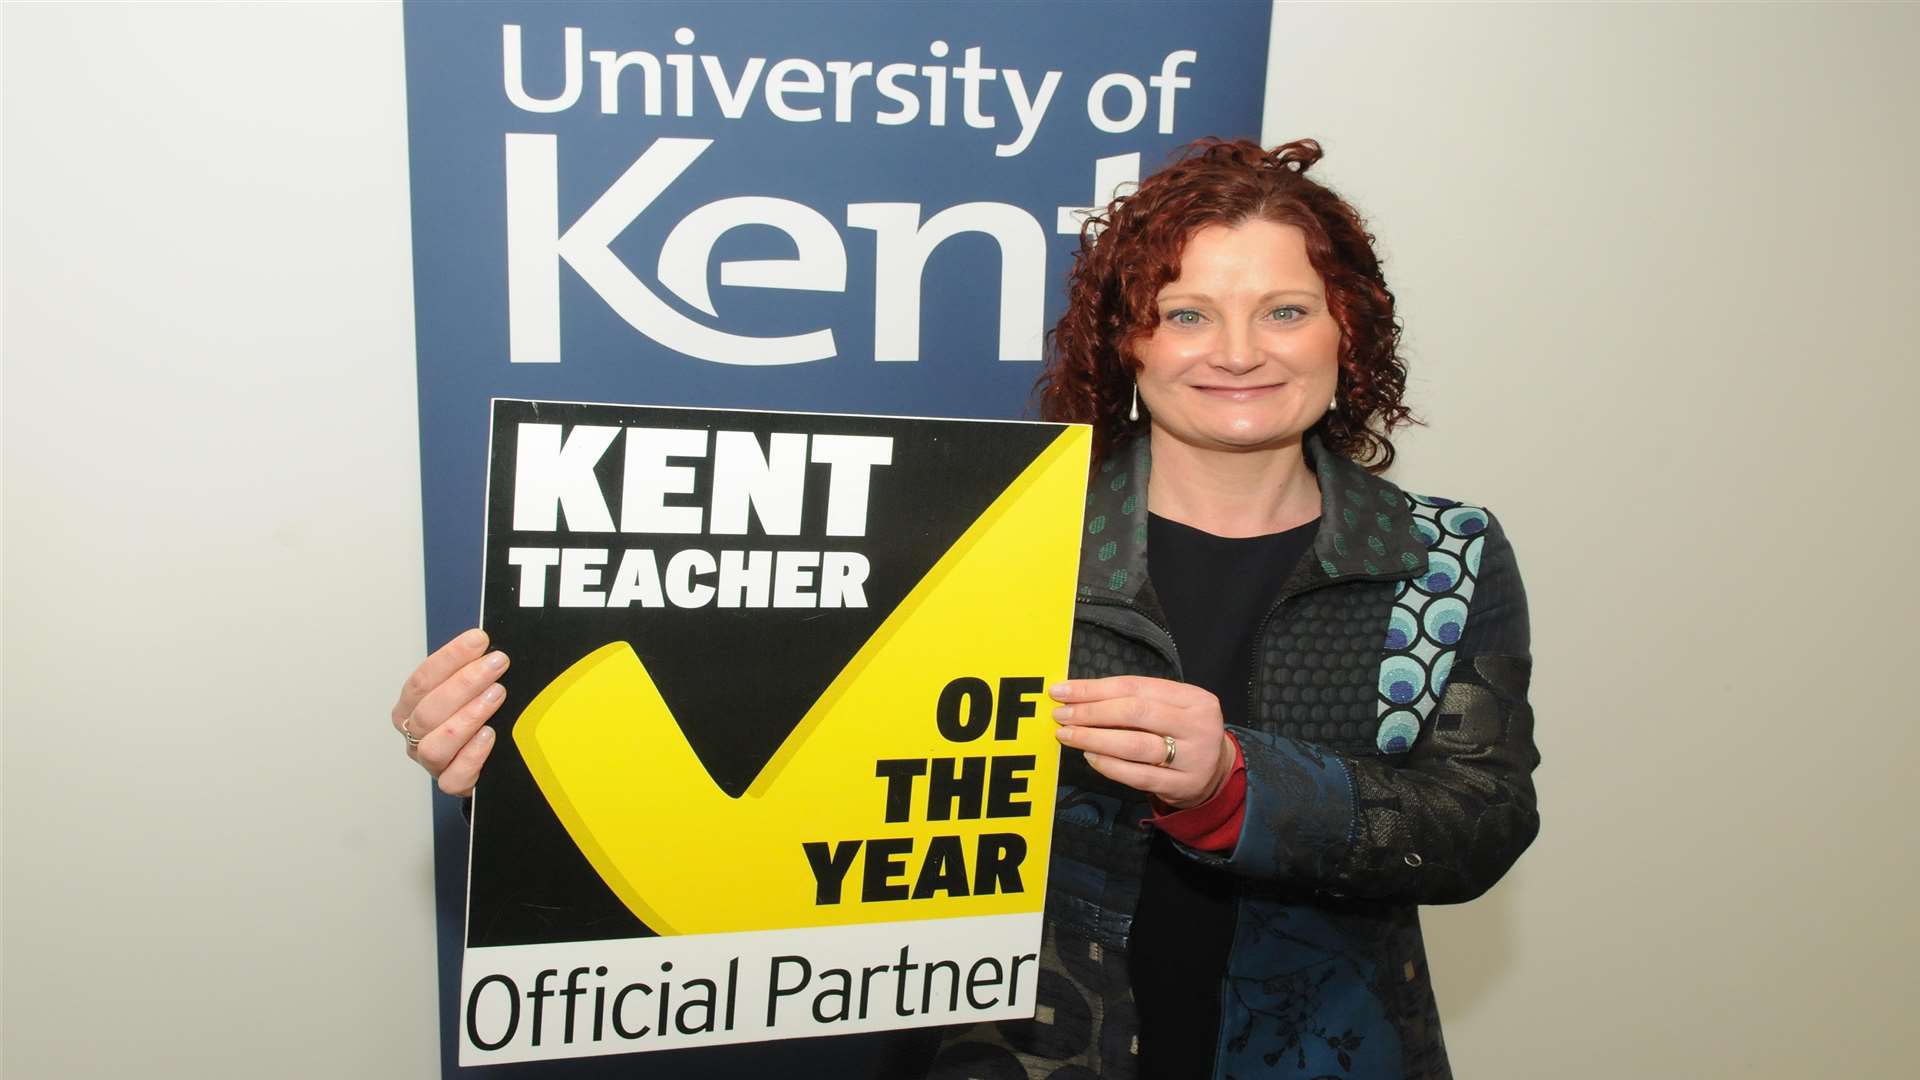 Professor Ruth Blakeley from the School of Politics and International Relations at the University of Kent which is supporting the Kent Teacher of the Year Awards.